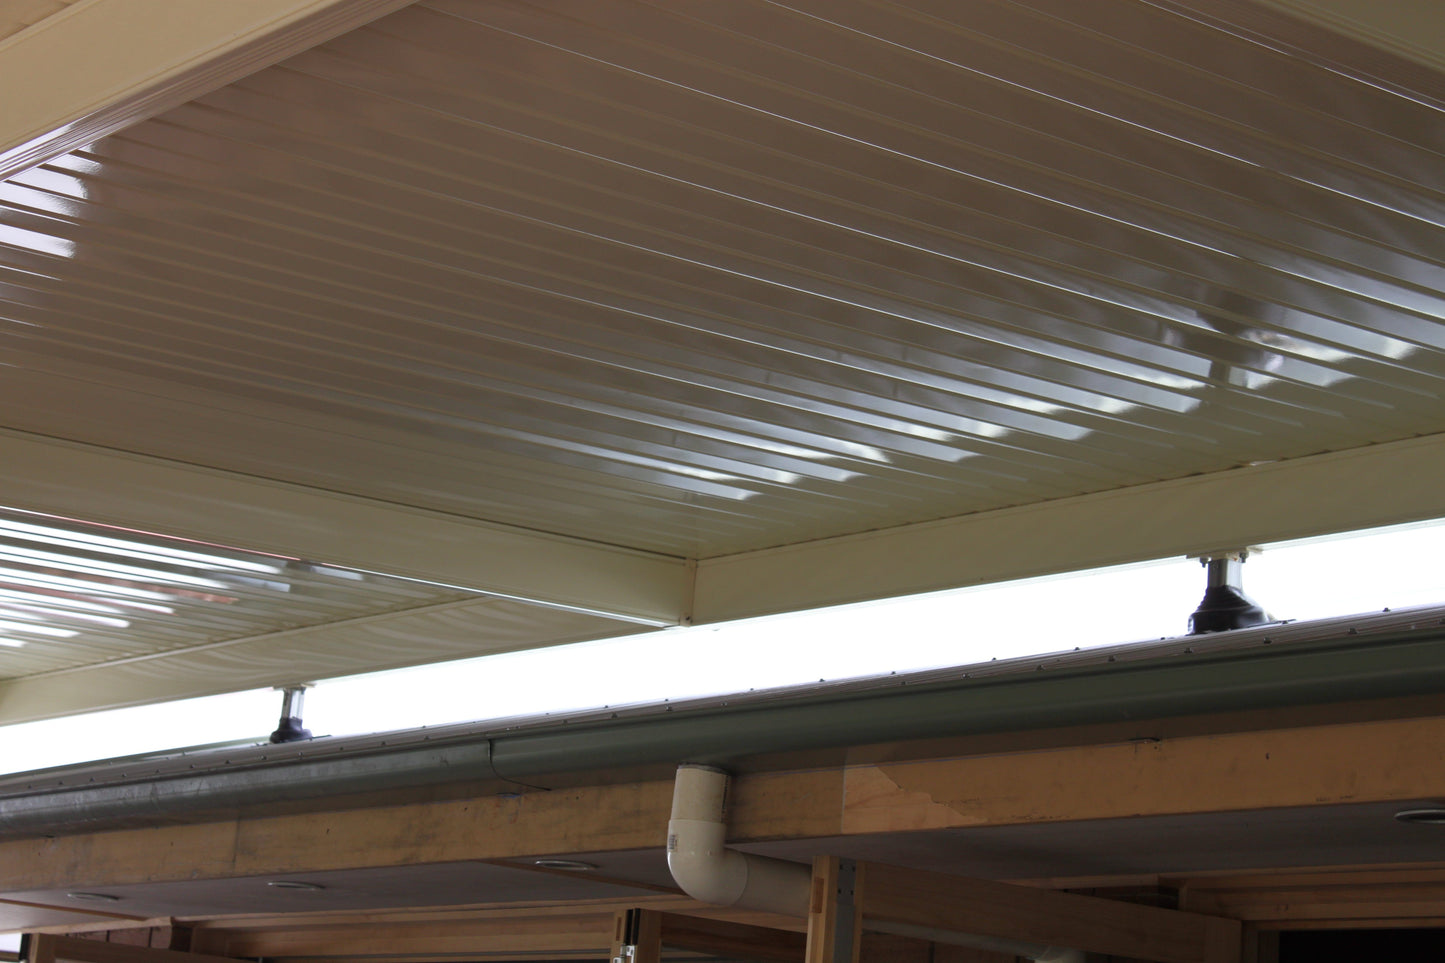 Insulated Flyover Patio Roof- 14m x 6m- Supply & Install QHI National